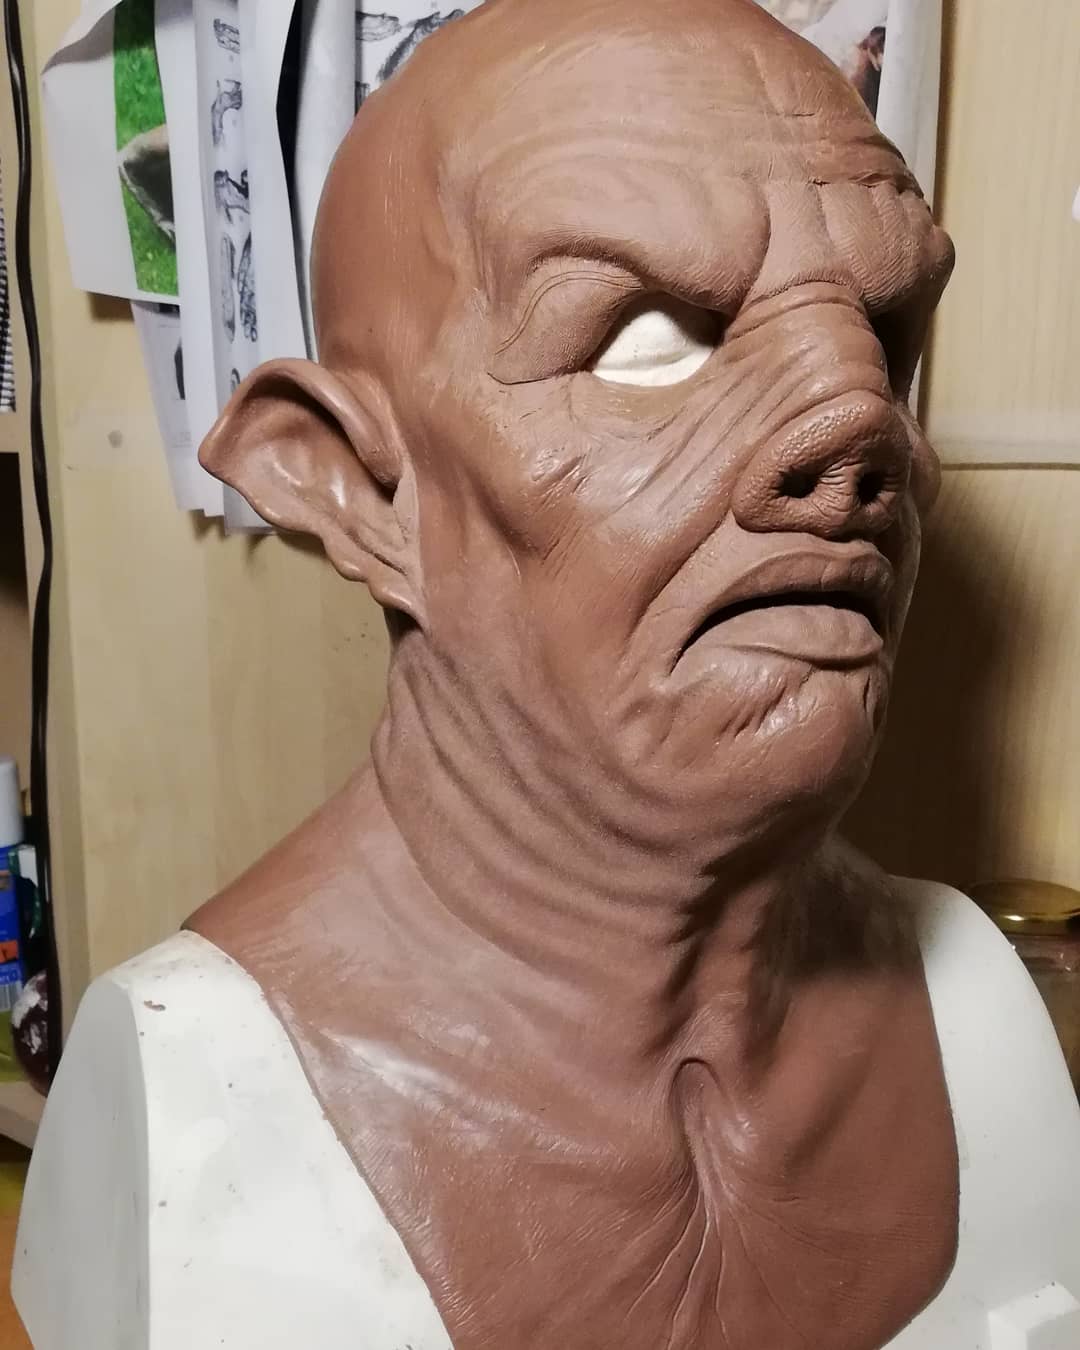 Monster Clay on X: Monster Clay Sculpt of the Day 7/15/18 📷: (INSTA)  glittertogore #sculpture #clay #oilclay #oilbasedclay #monsterclay  #ilovemonsterclay #monstermakers #sculptoftheday #sotd #mcsotd #monster  #facecup #cup #bigface #face #creature